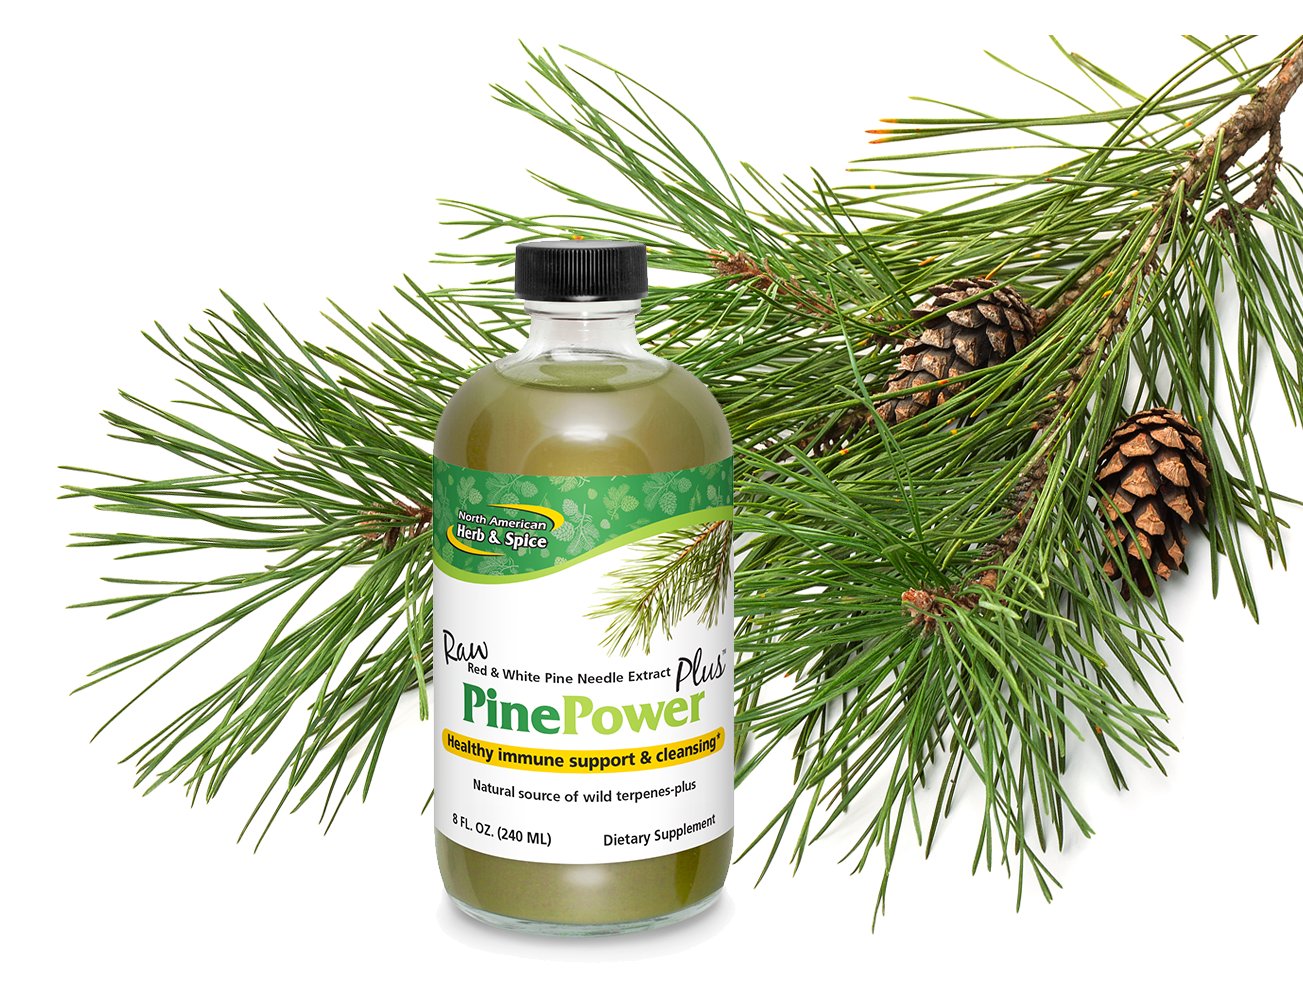 Pine needles with PinePower product